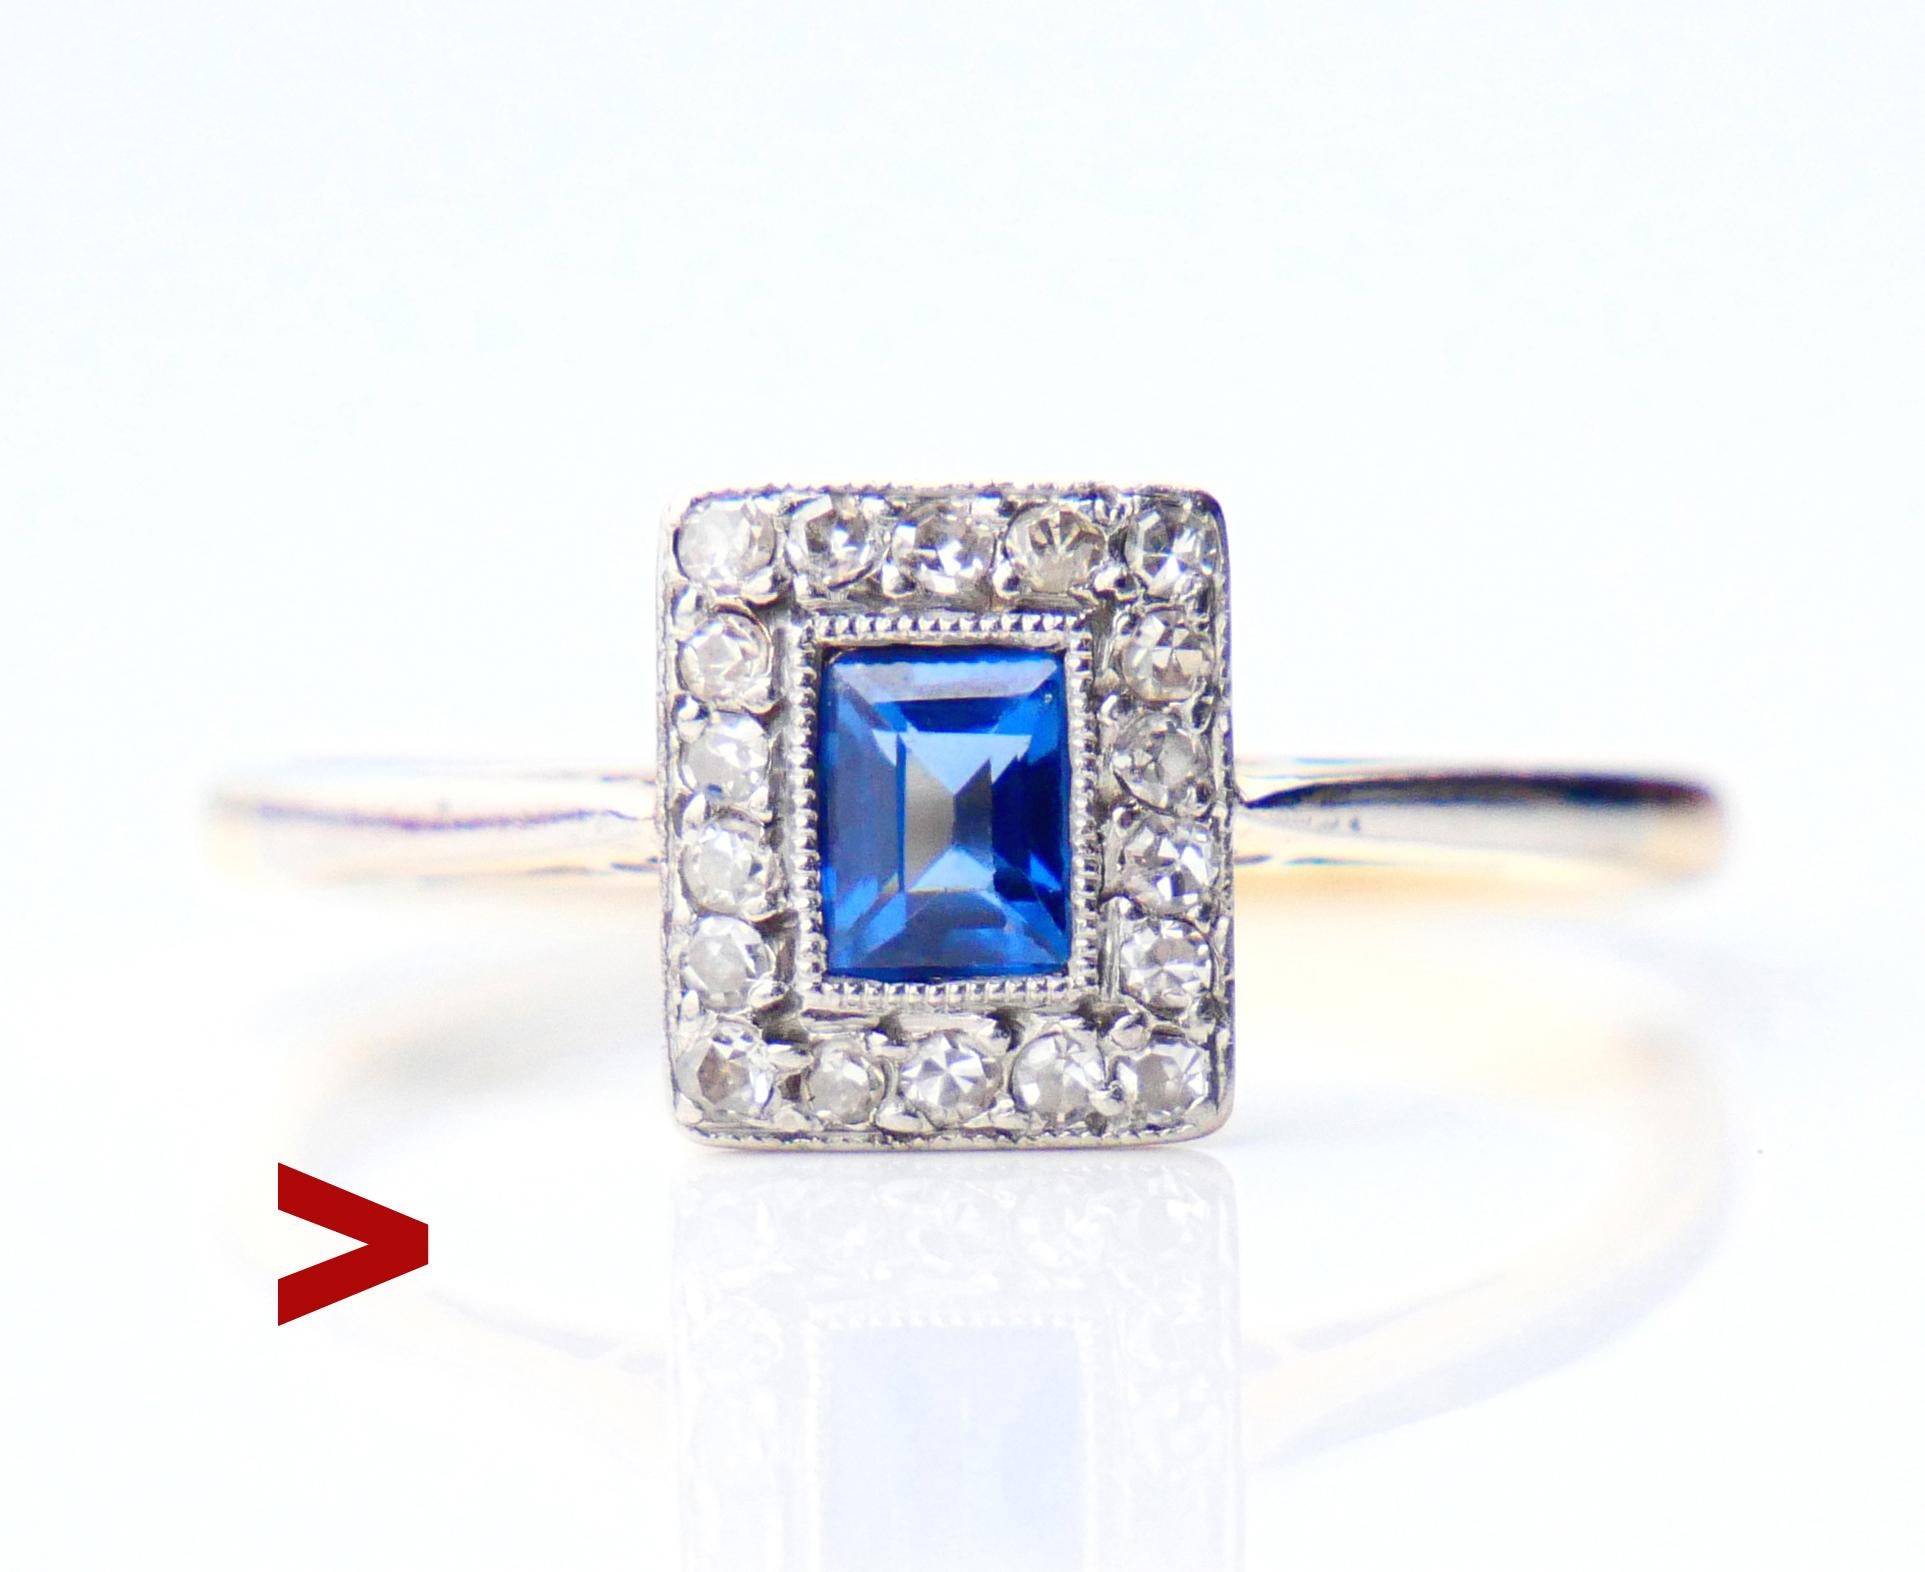 Beautiful Antique Art - Deco Sapphire and Diamonds Ring made between ca. 1920 -1940s.

The Crown is 8 mm x 7 mm x 4mm deep.
Band hallmarked 18 ct and PLAT (platinum).

Band in solid 18ct Yellow Gold with top of the crown in Platinum featuring